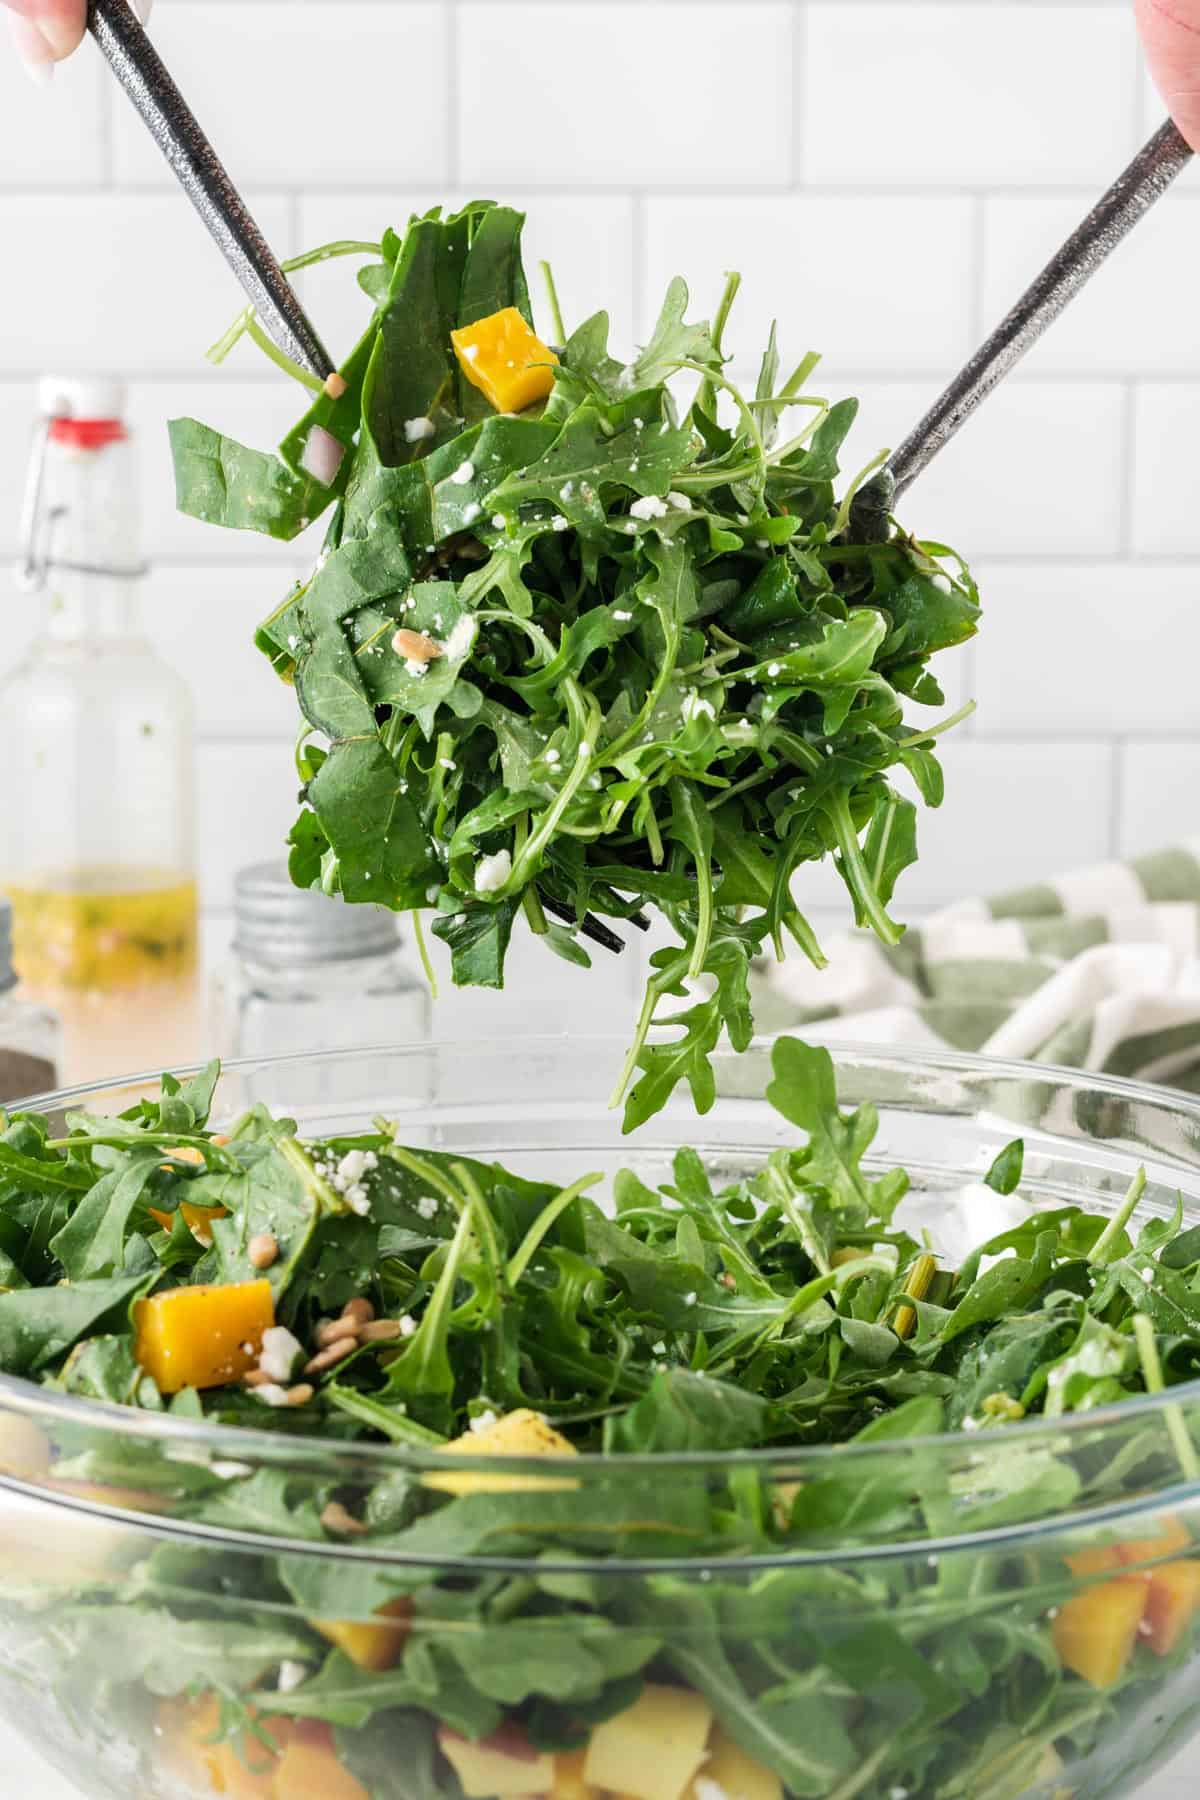 A picture of scooping up salad with arugula and yellow beets